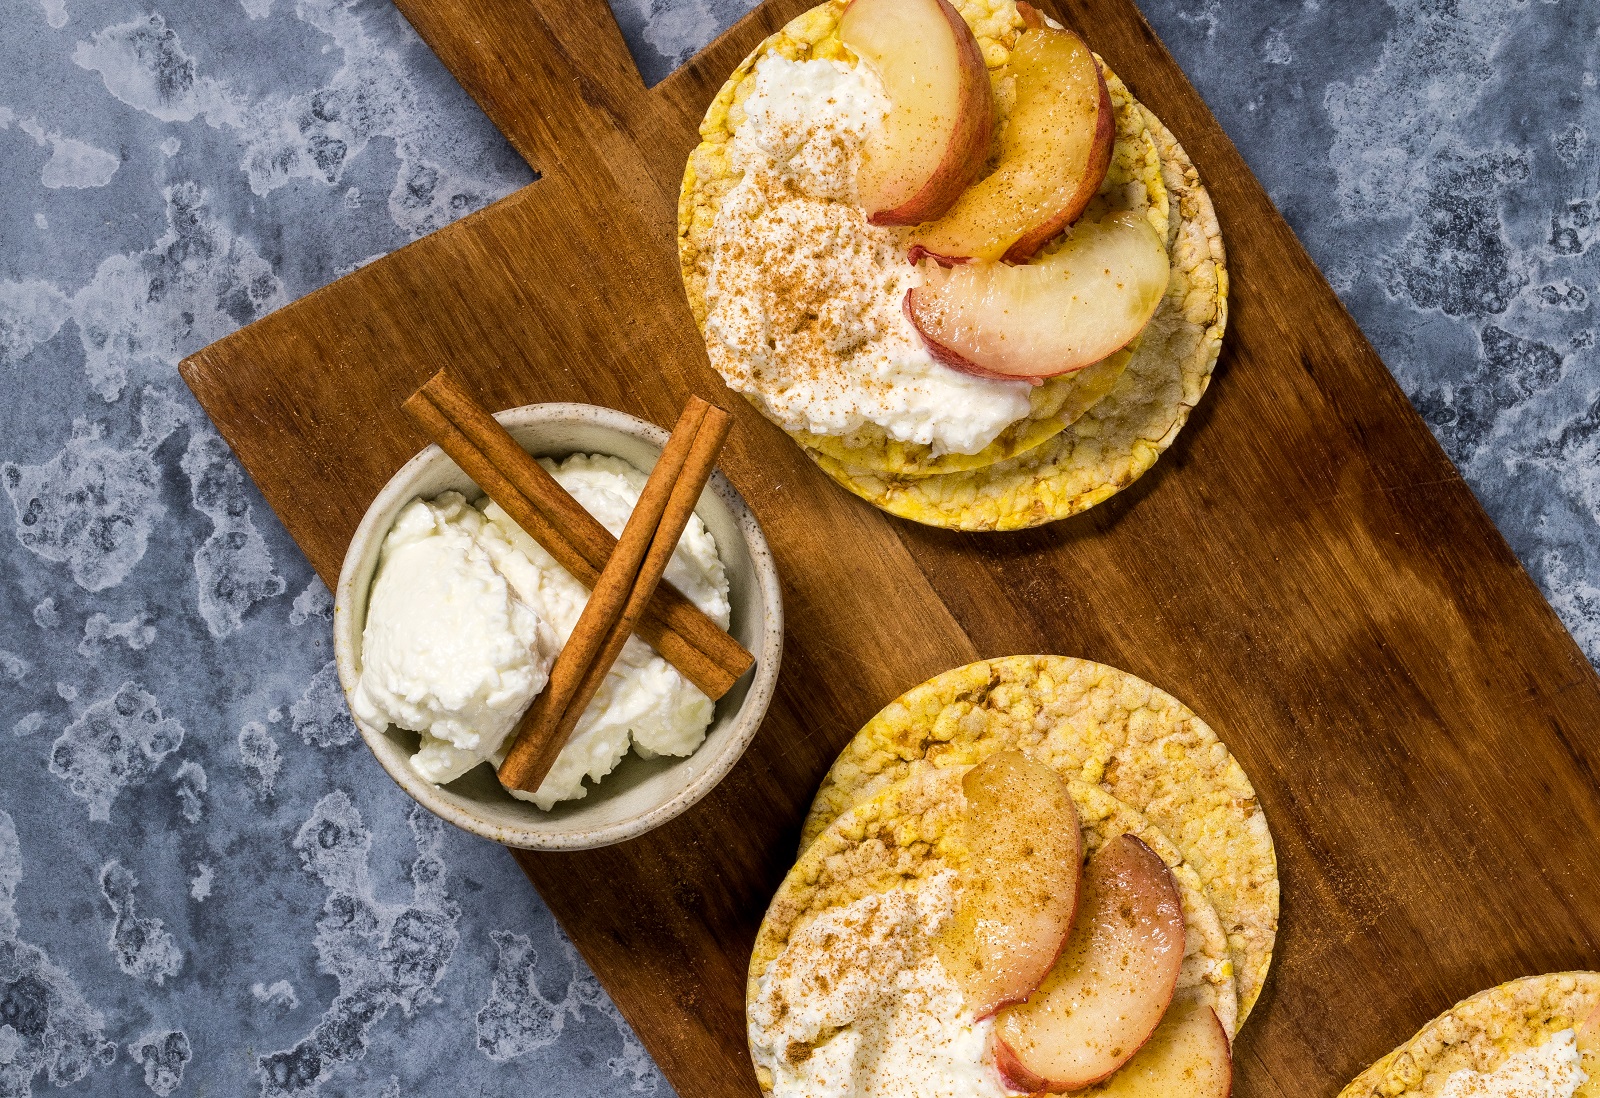 Cottage cheese, white peach and cinnamon of CORN THINS slices for breakfast